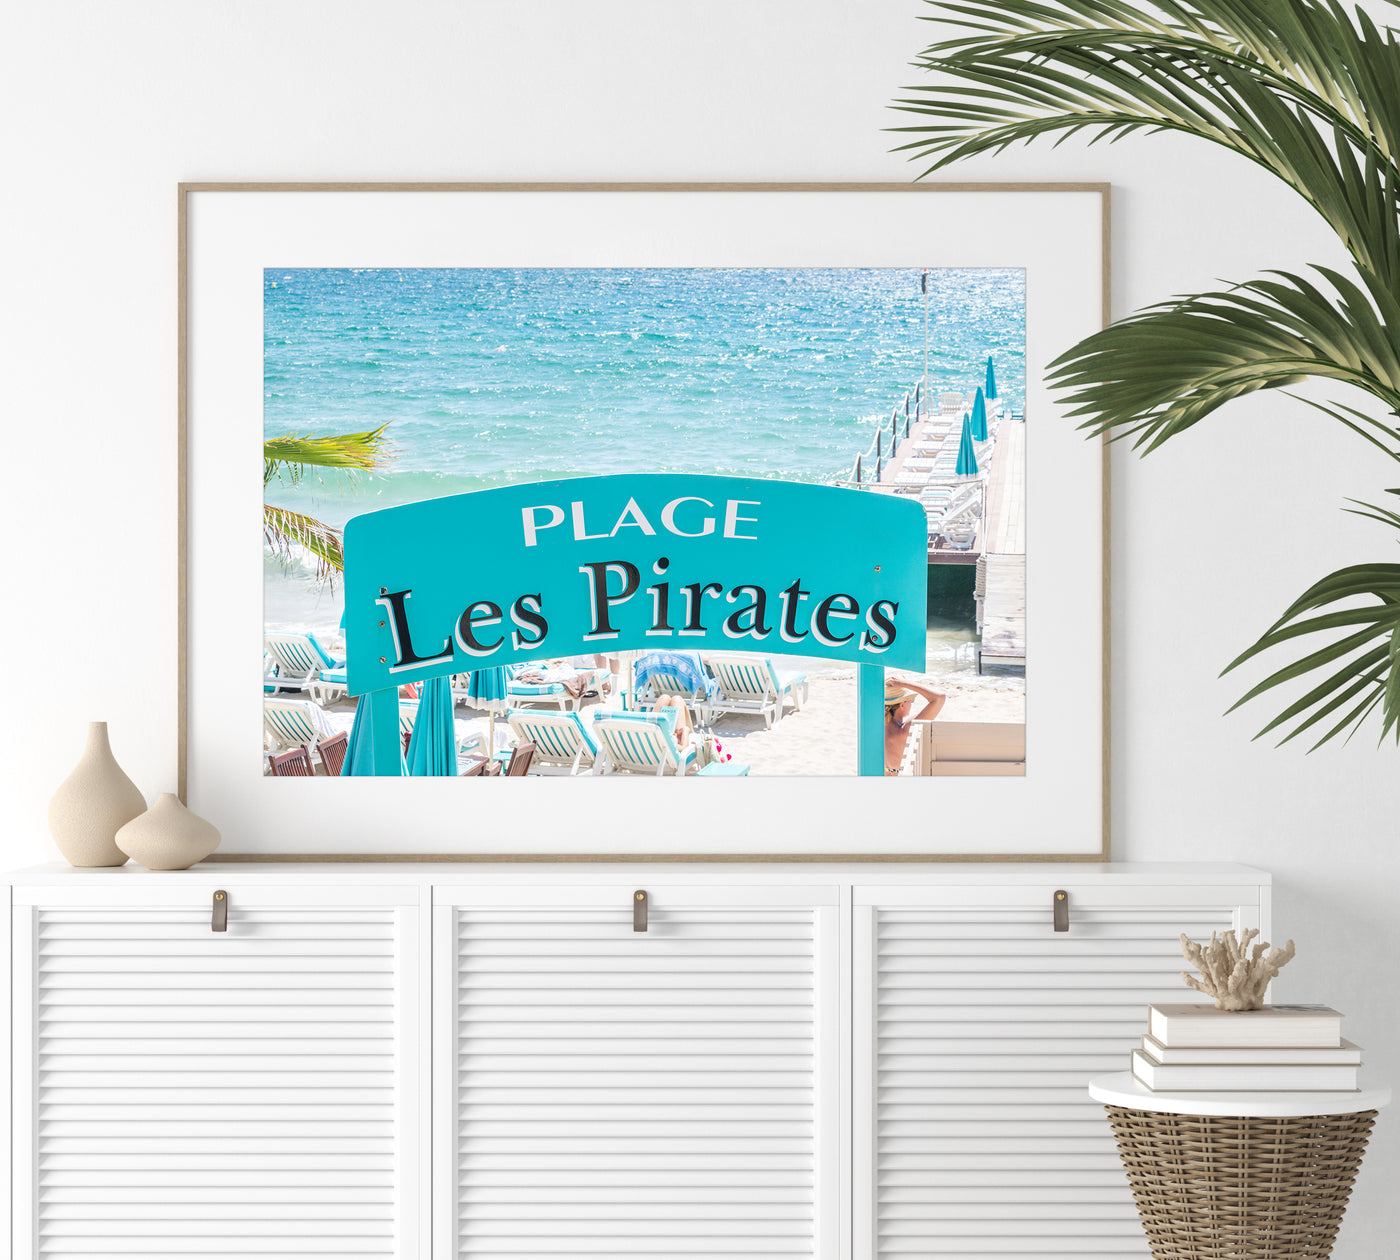 Plage les Pirates - Beach photography art print by Cattie Coyle Photography